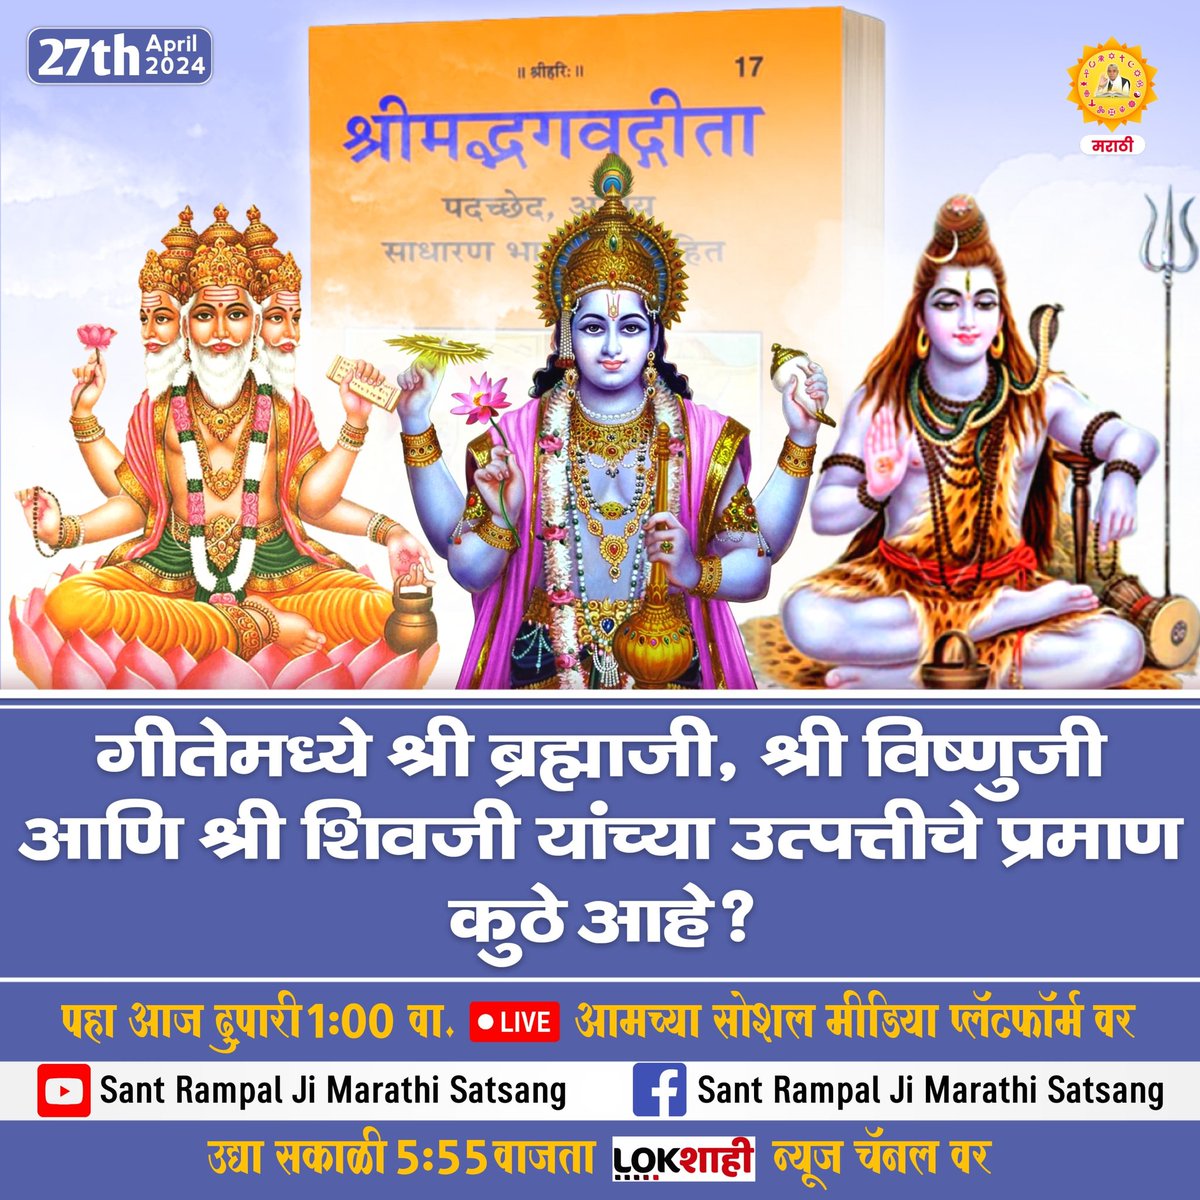 #GodMorningWednesday
Sant Rampal Ji Maharaj
Does Not Prohibit
the Sadhna of Hindu Gods or deities
There are seven chakras in the body which belongs to different Gods and deities.
One has to open these chakras by recitation of mantras of the respective deities.
#wednesdaythought